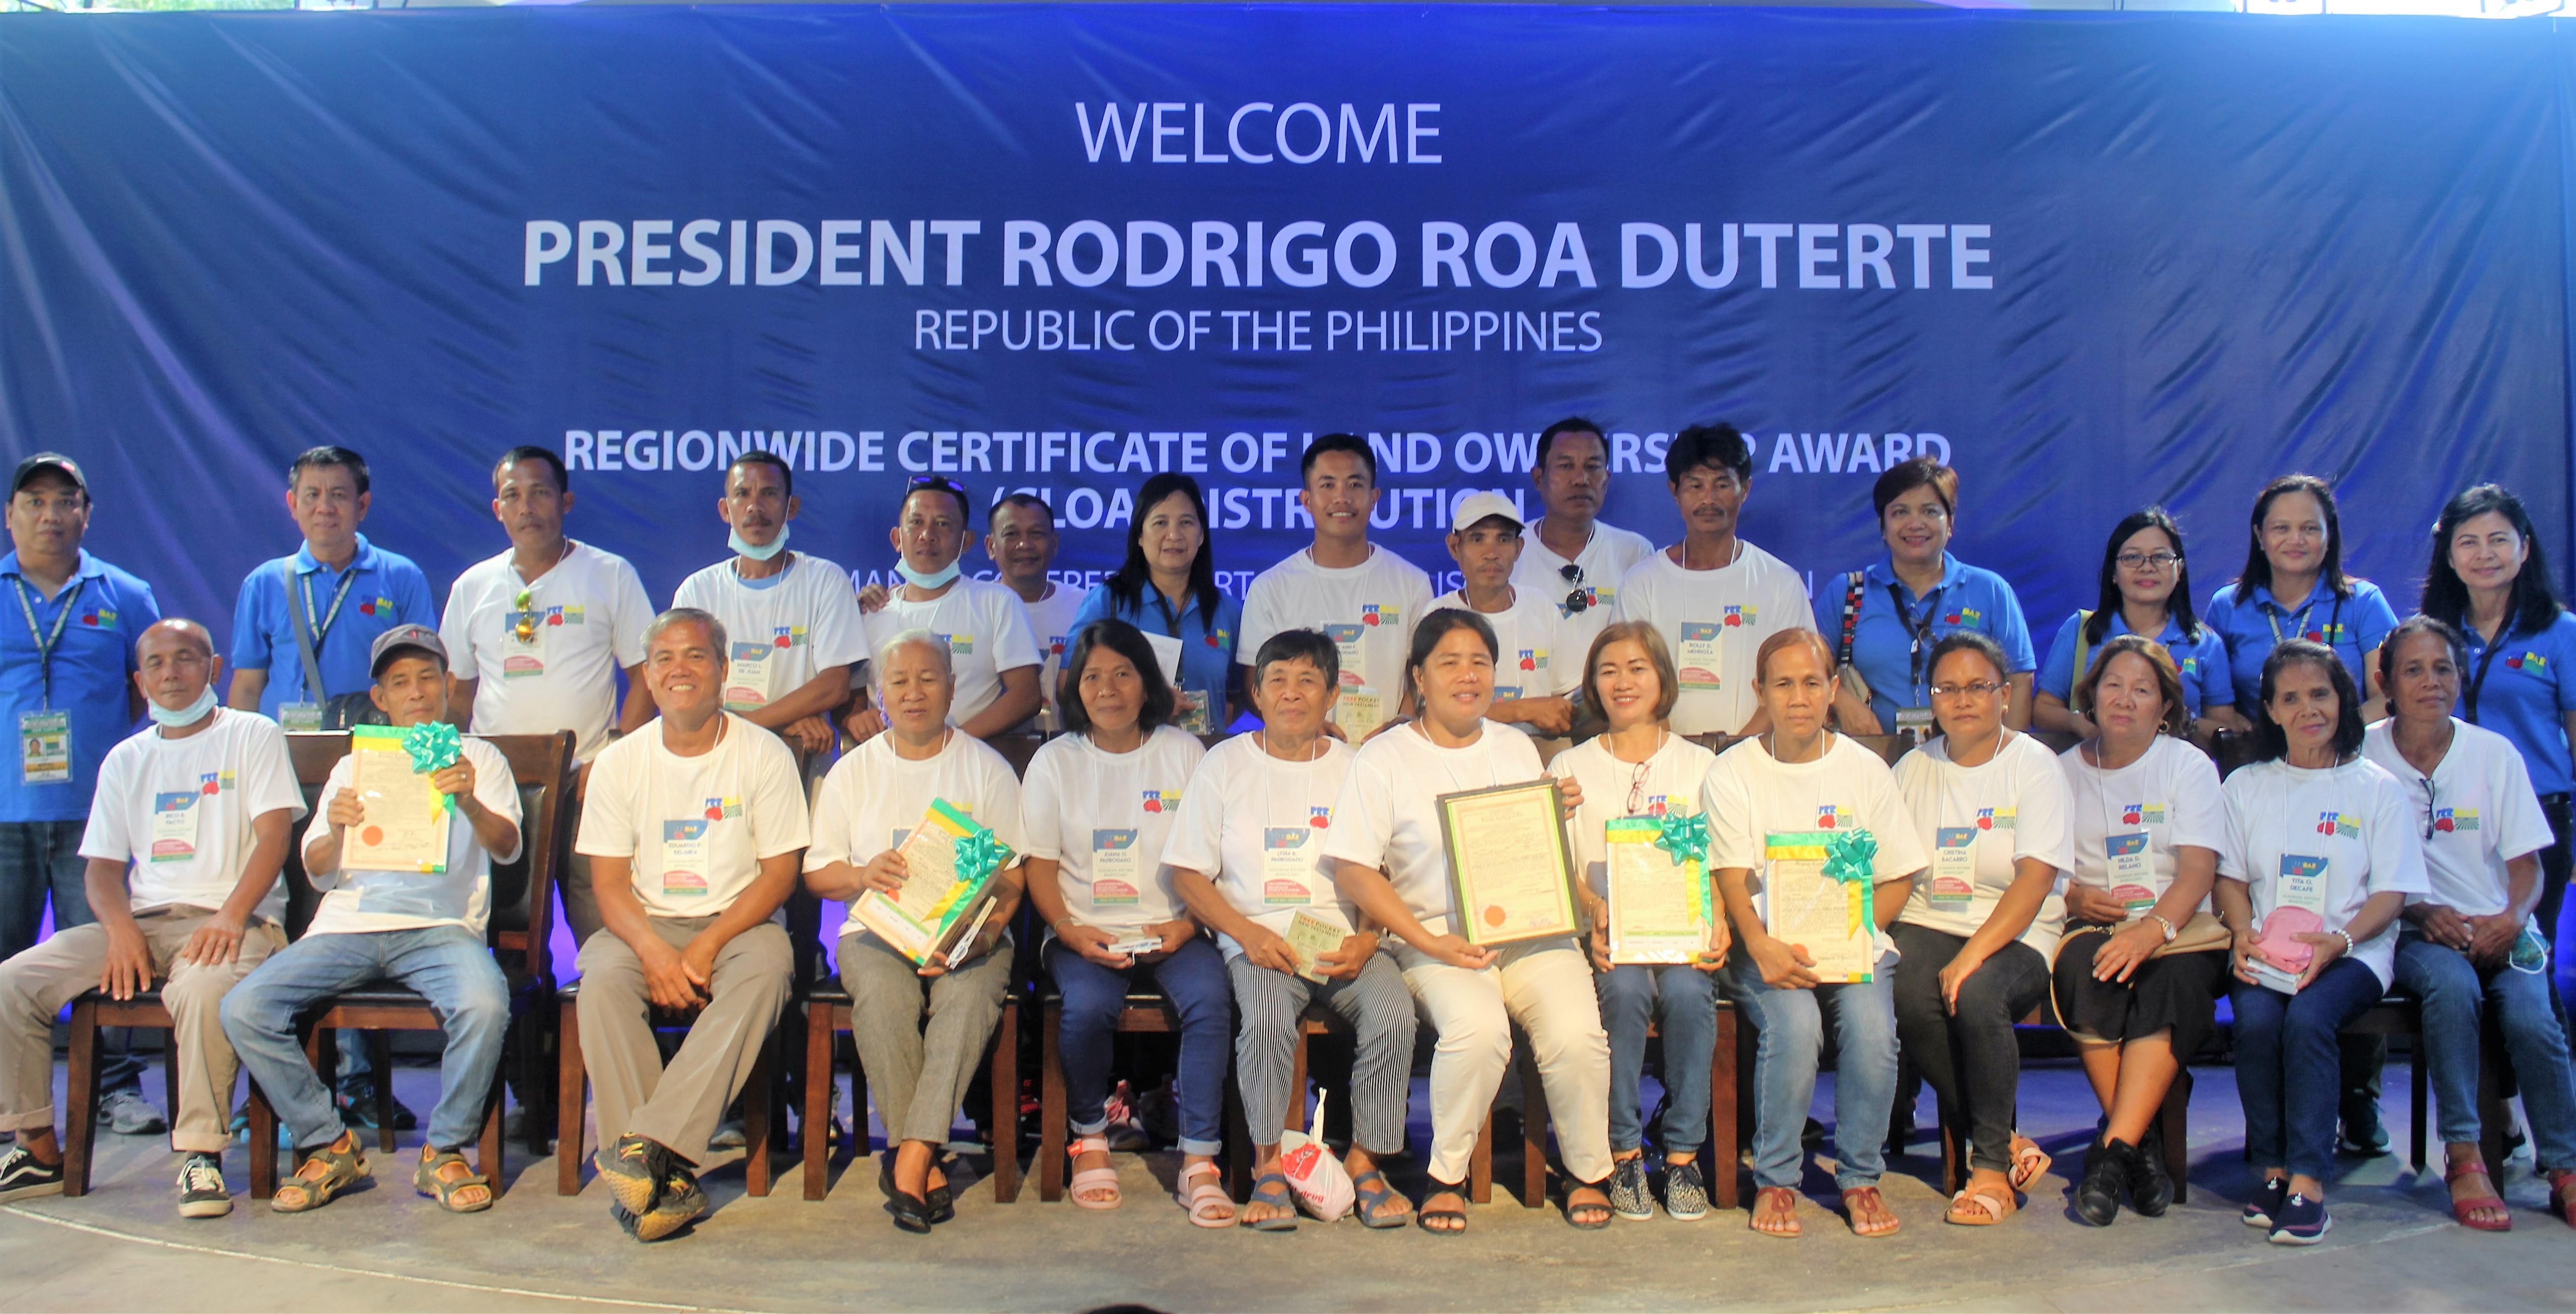 Agrarian Reform Beneficiaries together with DAR Capiz Officials and Employees during the Regionwide EP/CLOA Distribution at Boracay Island, Malay, Aklan last March 12,2020